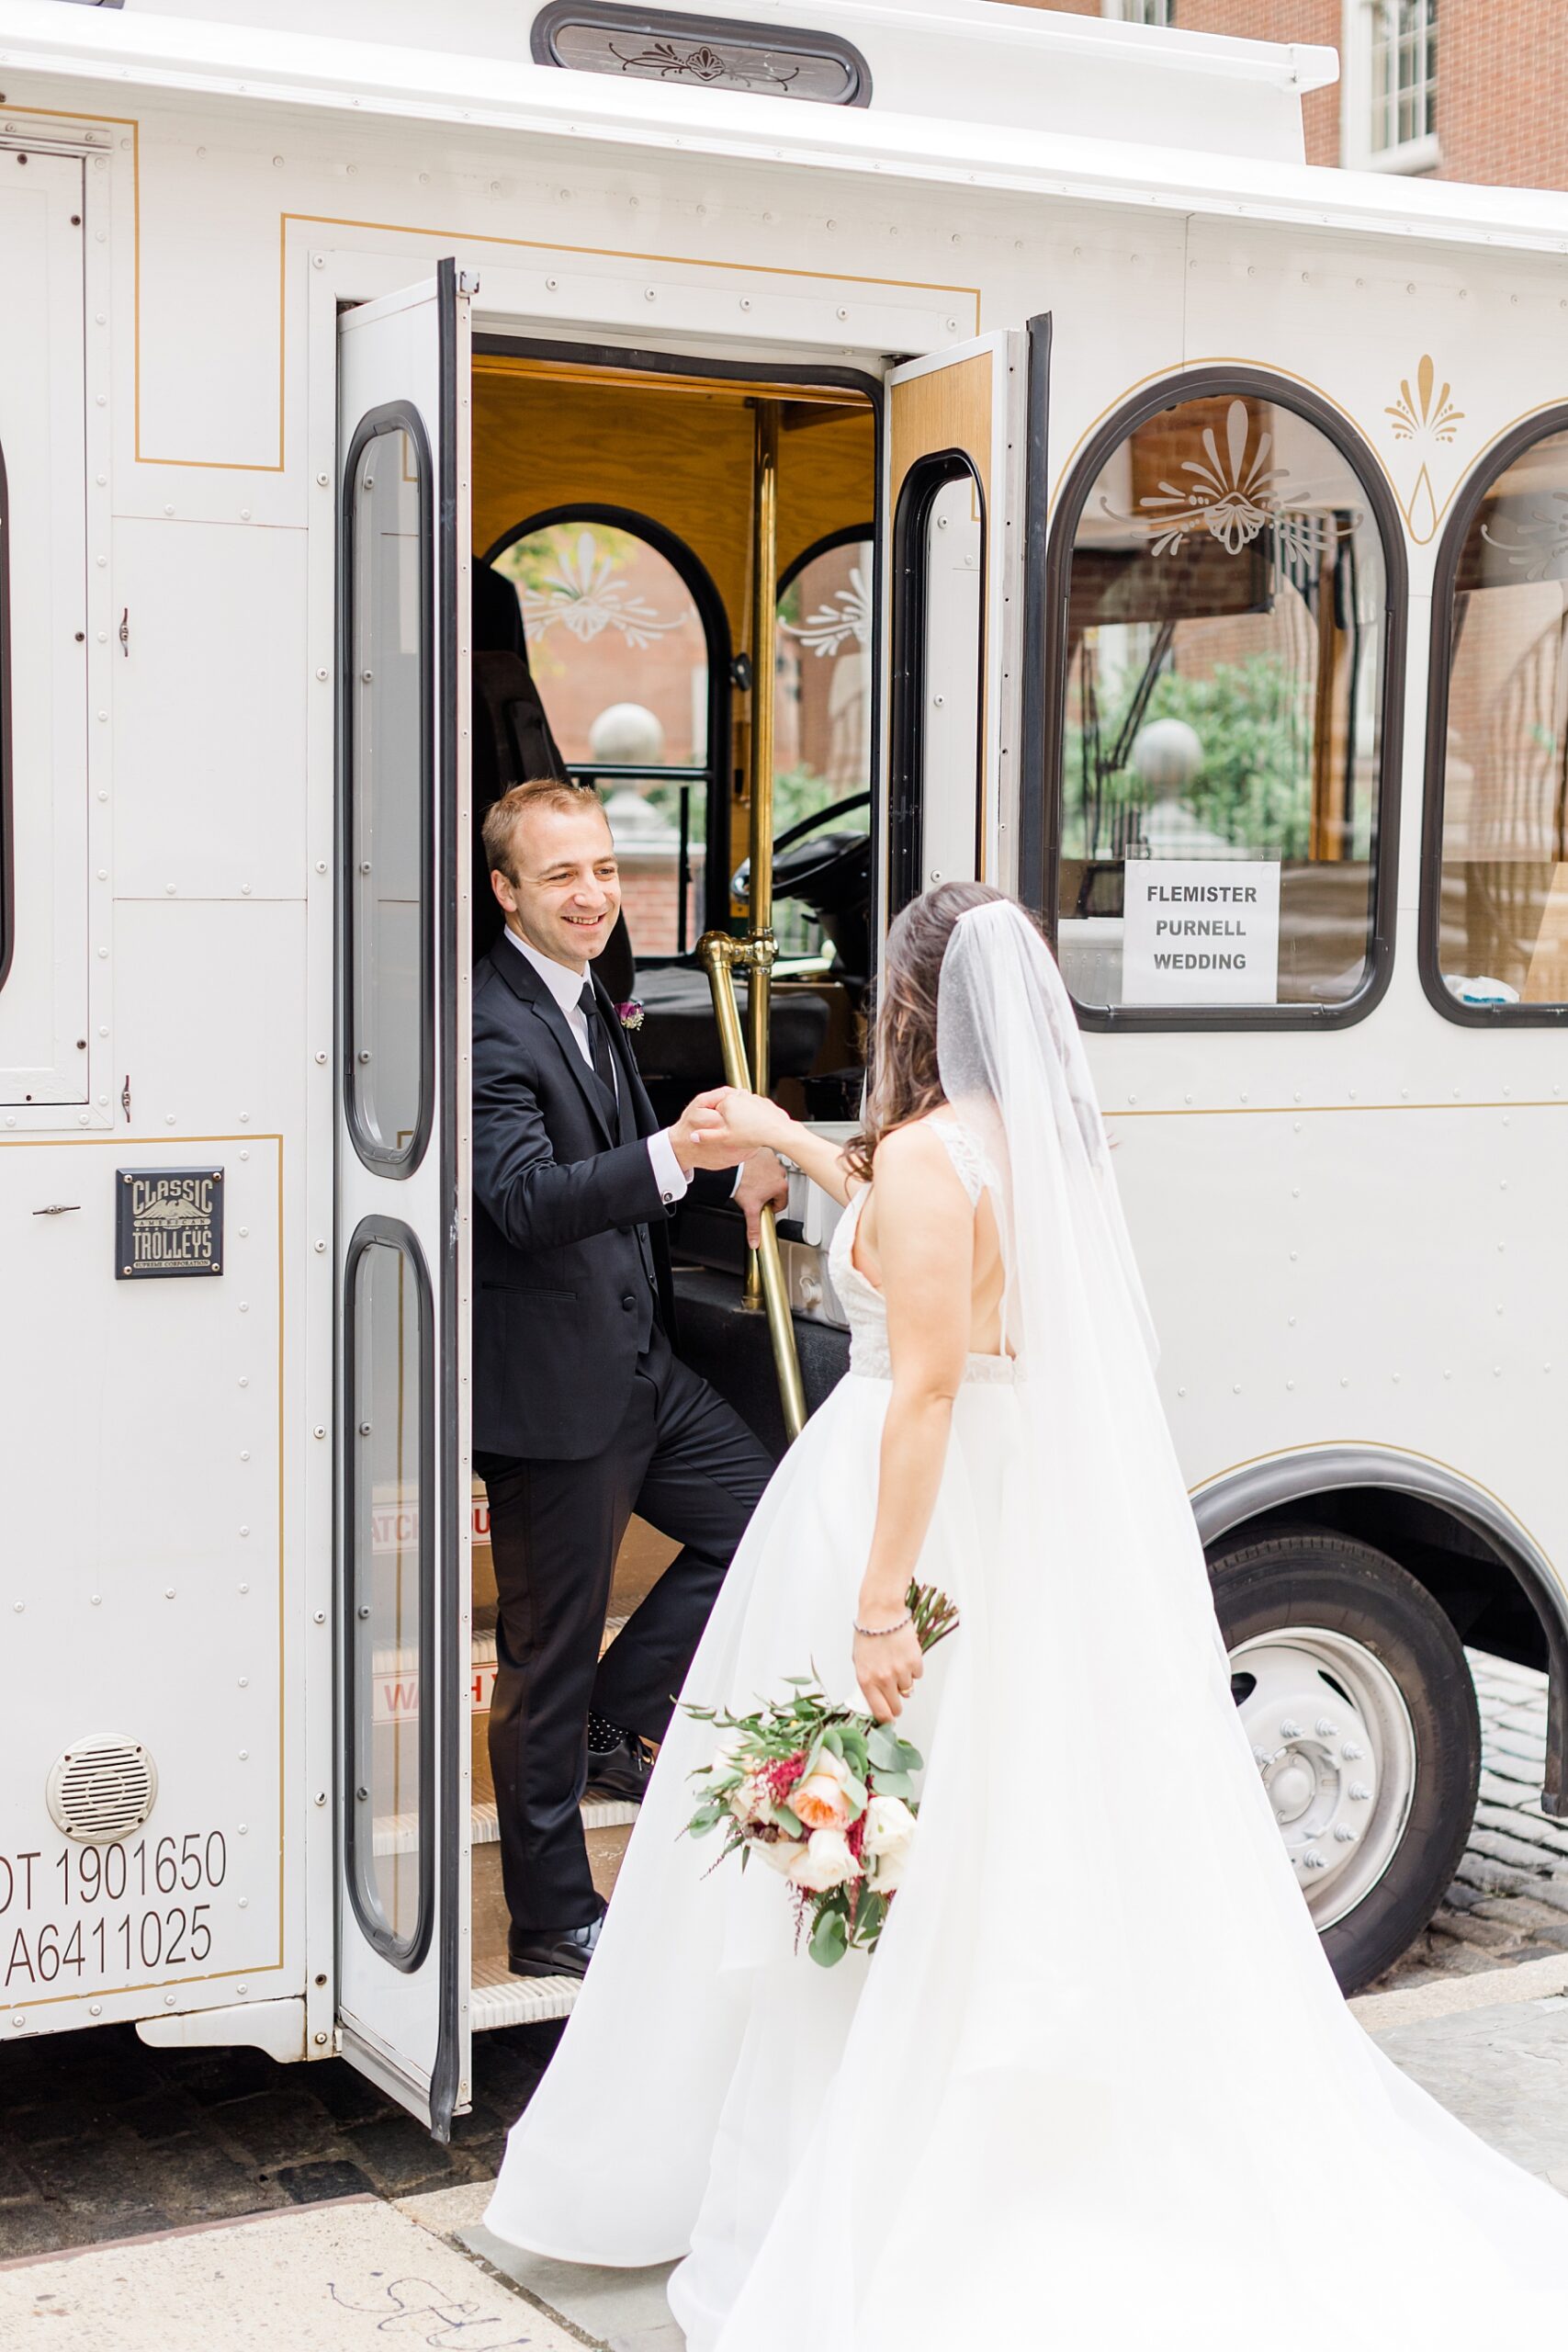 groom helps bride onto bus to go to The Down Town Club Wedding ceremony 